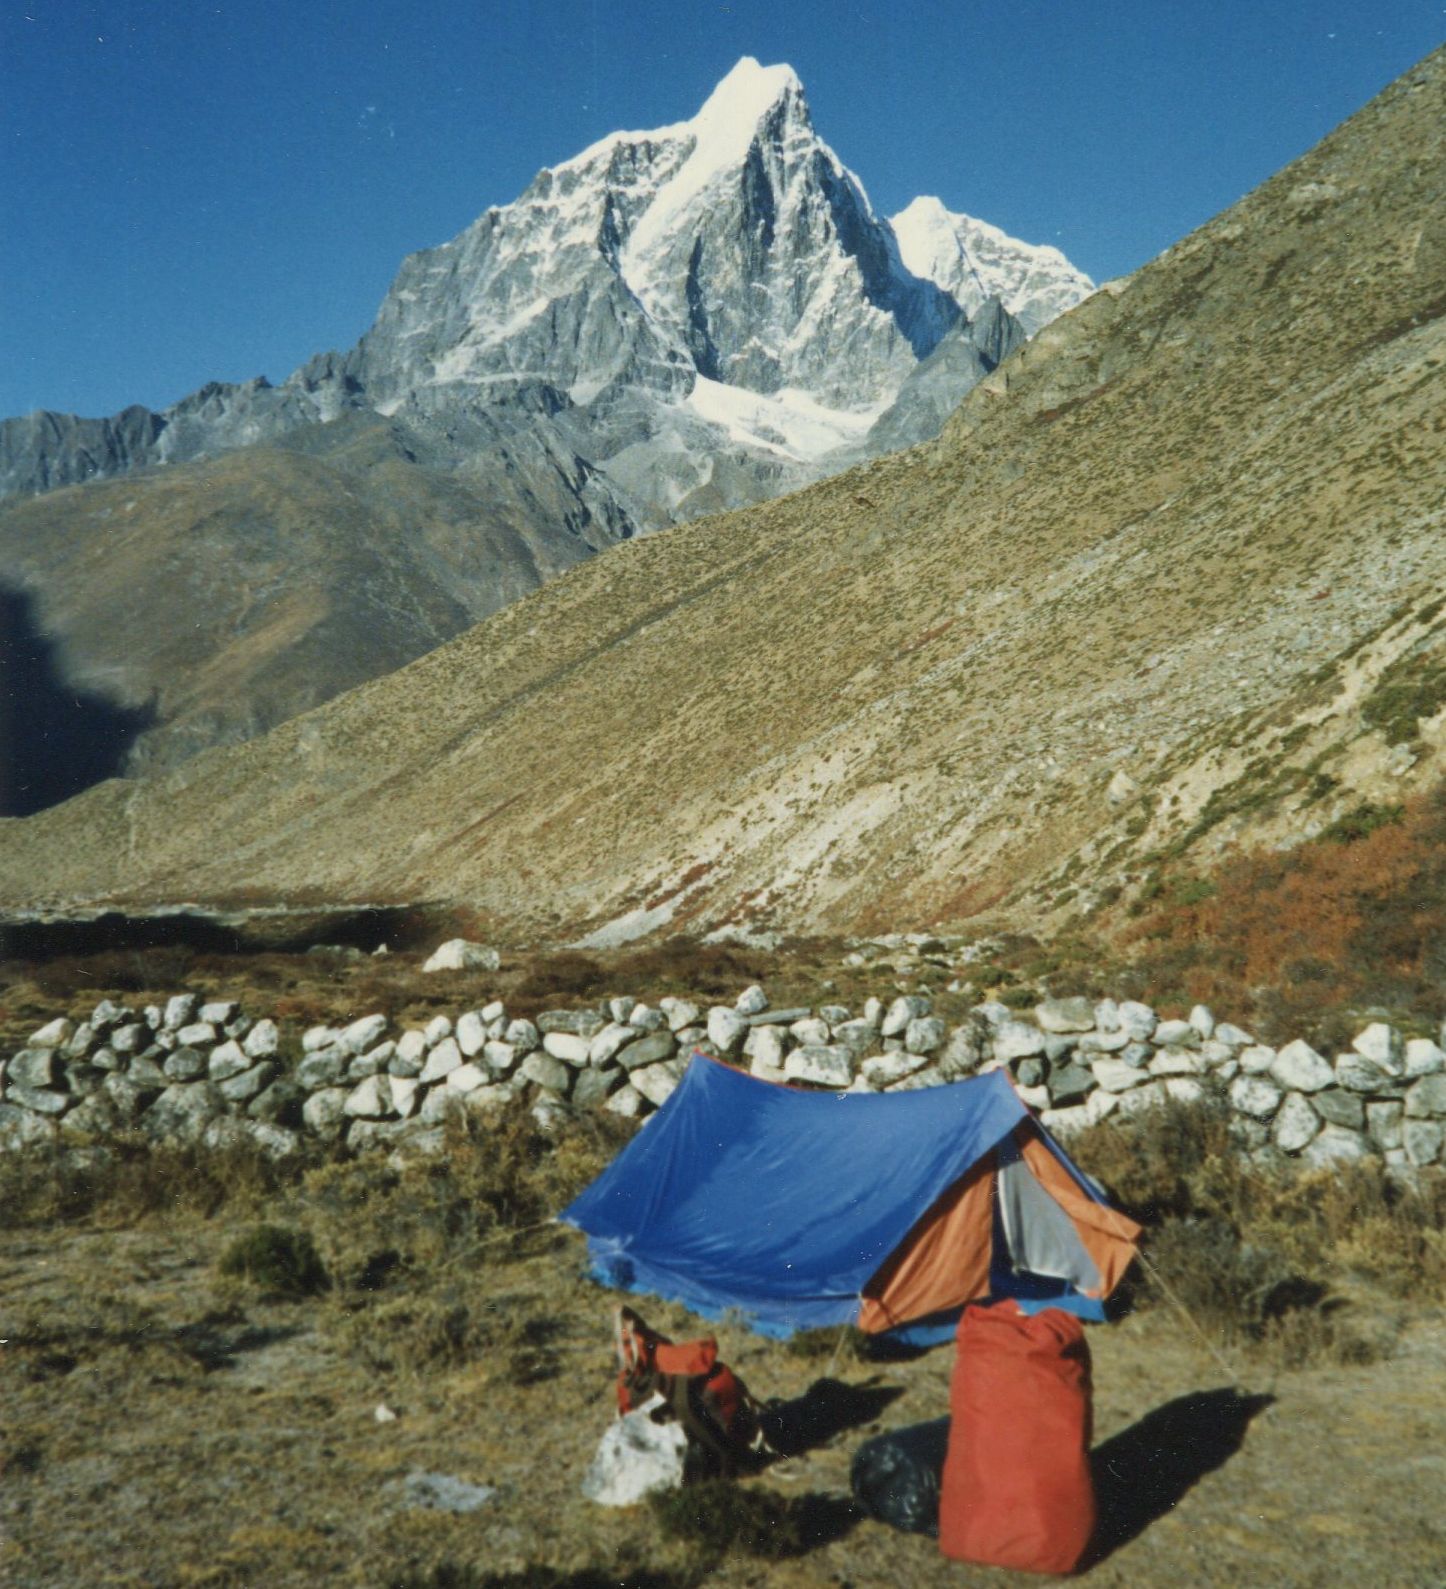 Mt.Taboche from camp at Bibre in the Imja Khola Valley